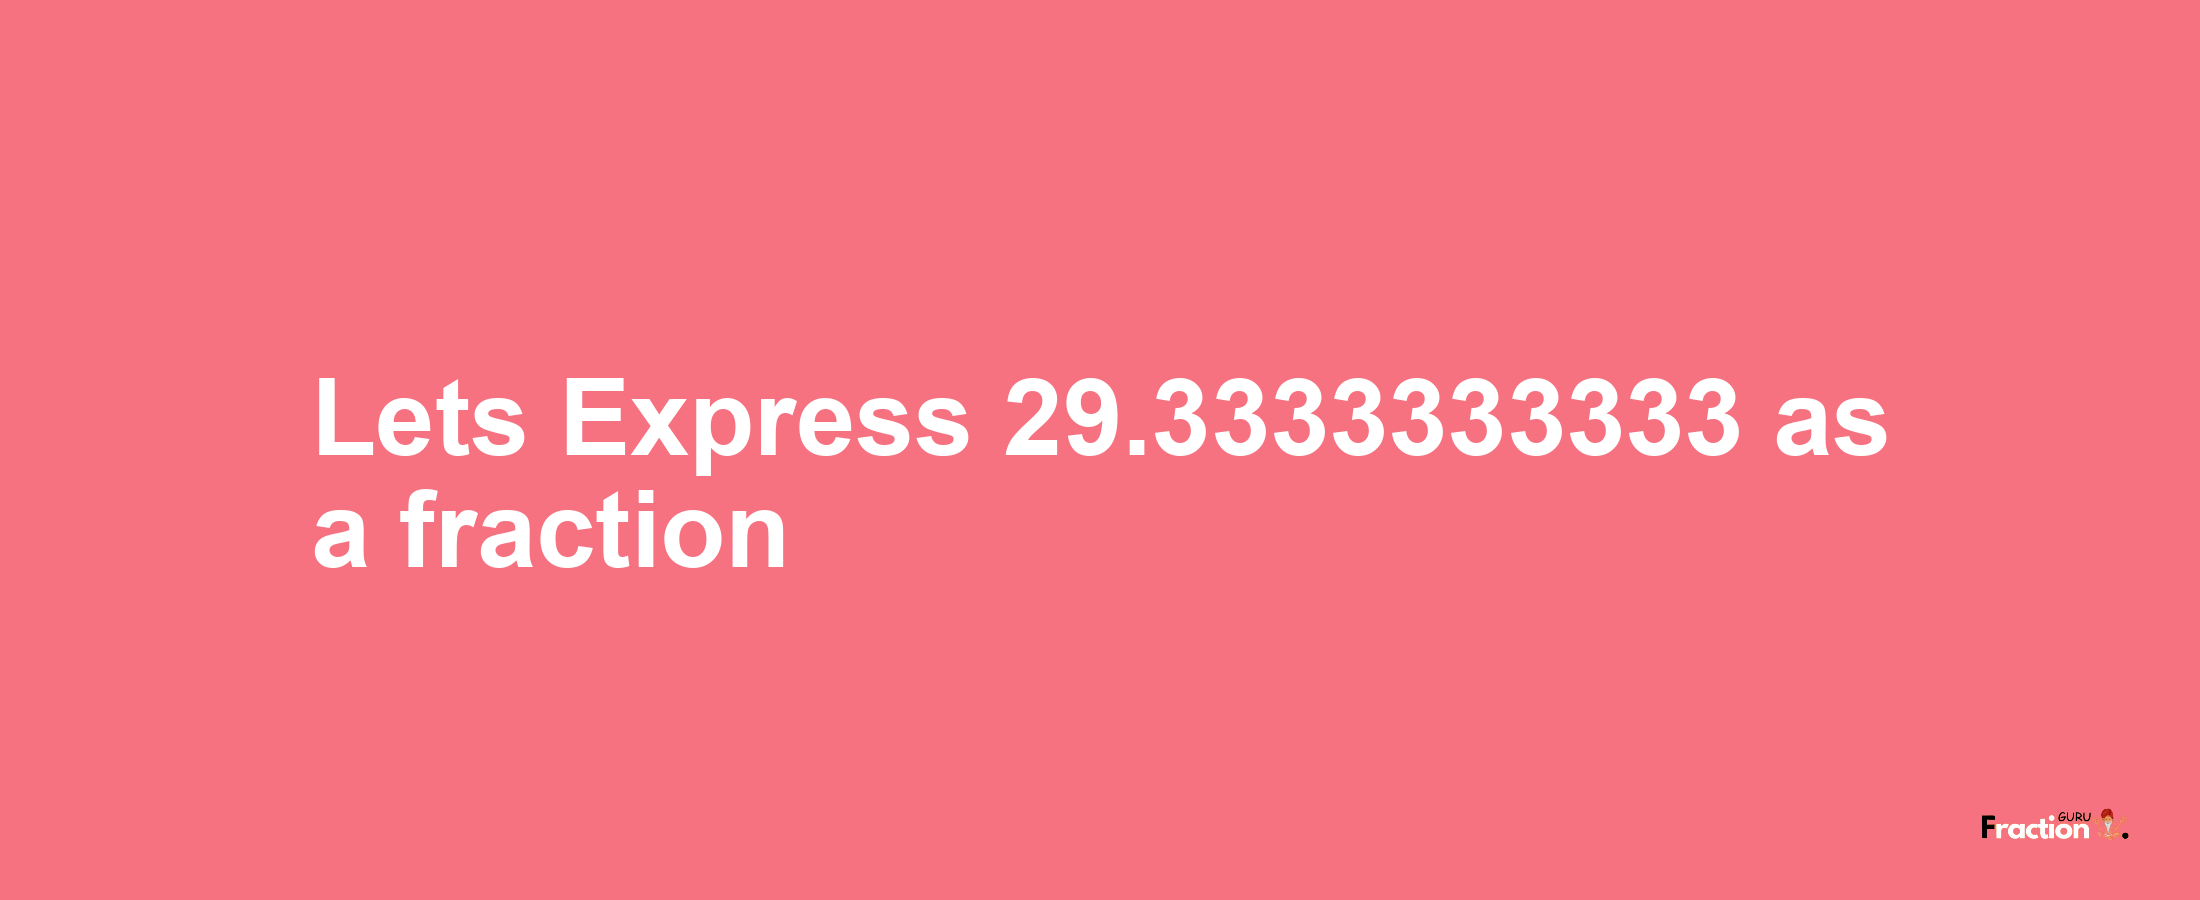 Lets Express 29.3333333333 as afraction